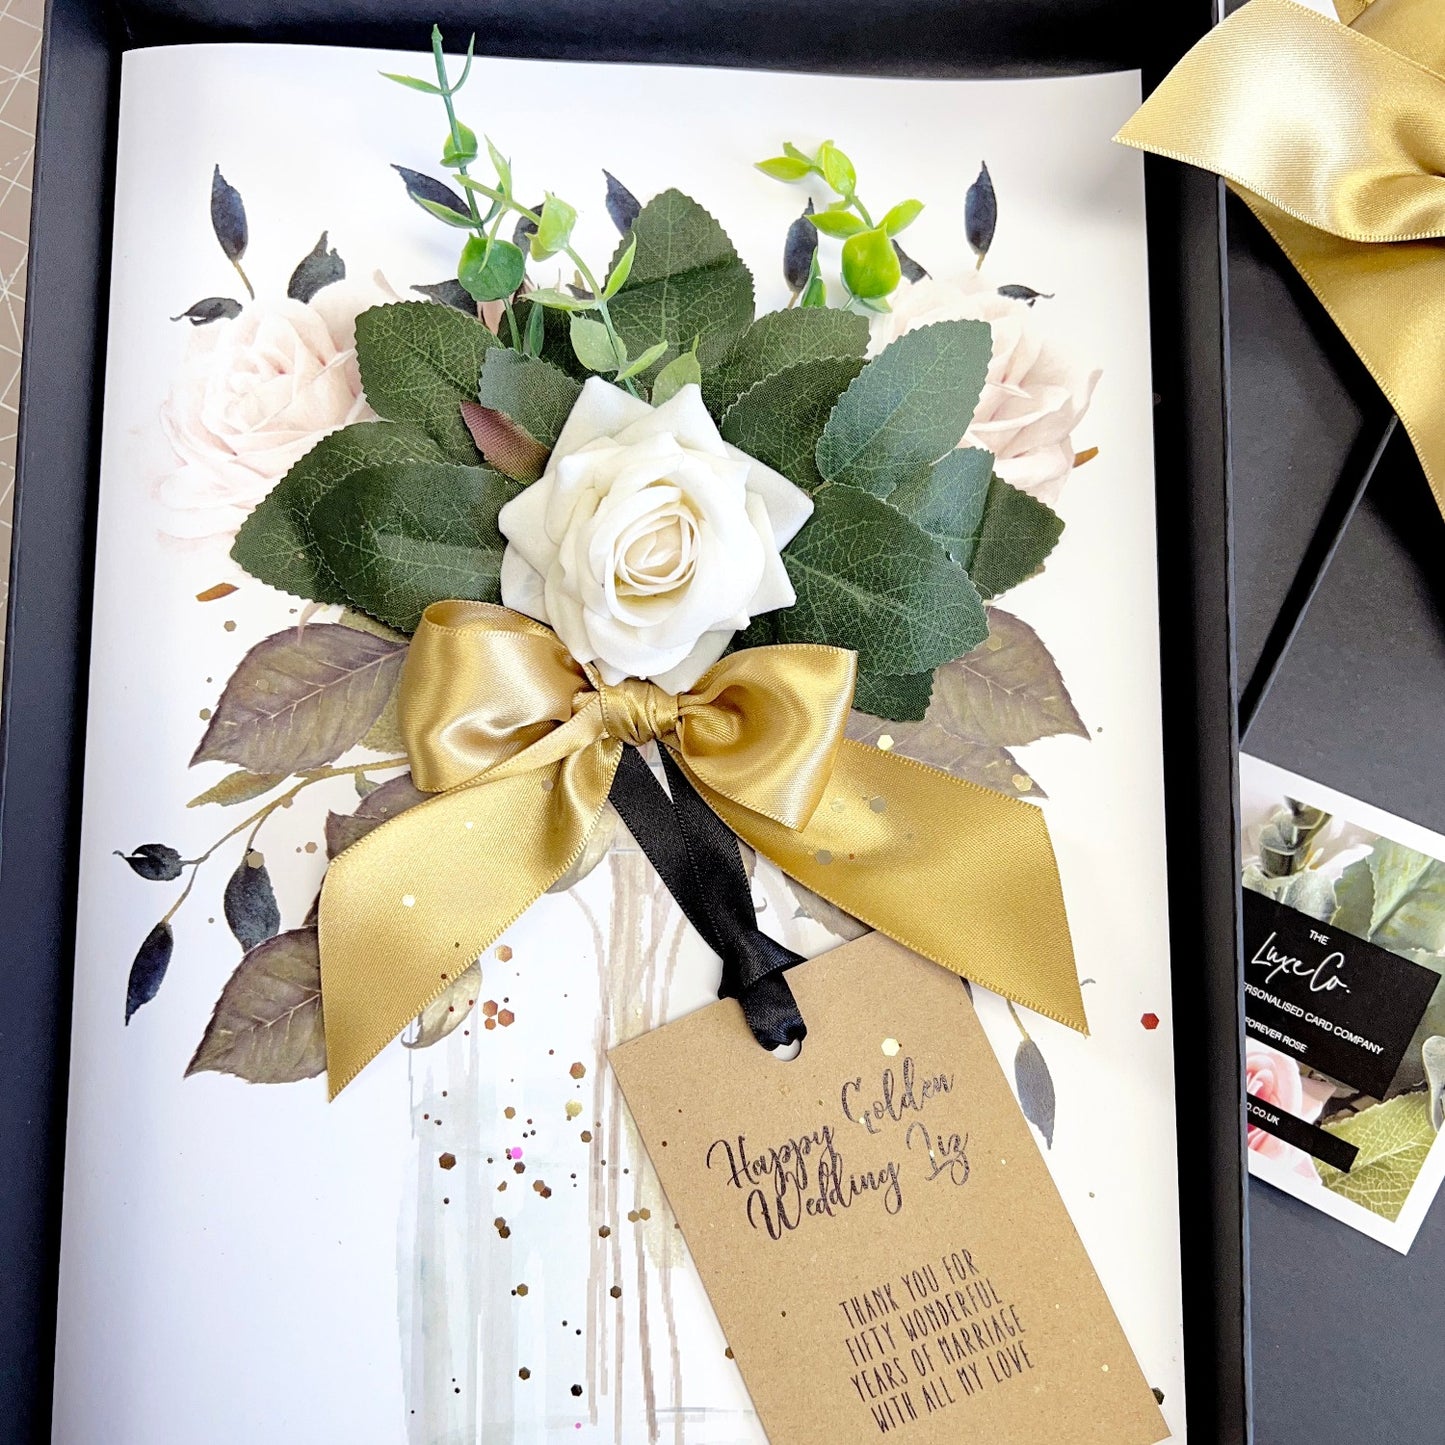 Luxury Golden Anniversary card - ivory rose scented in box with golden ribbon for 50th wedding anniversary